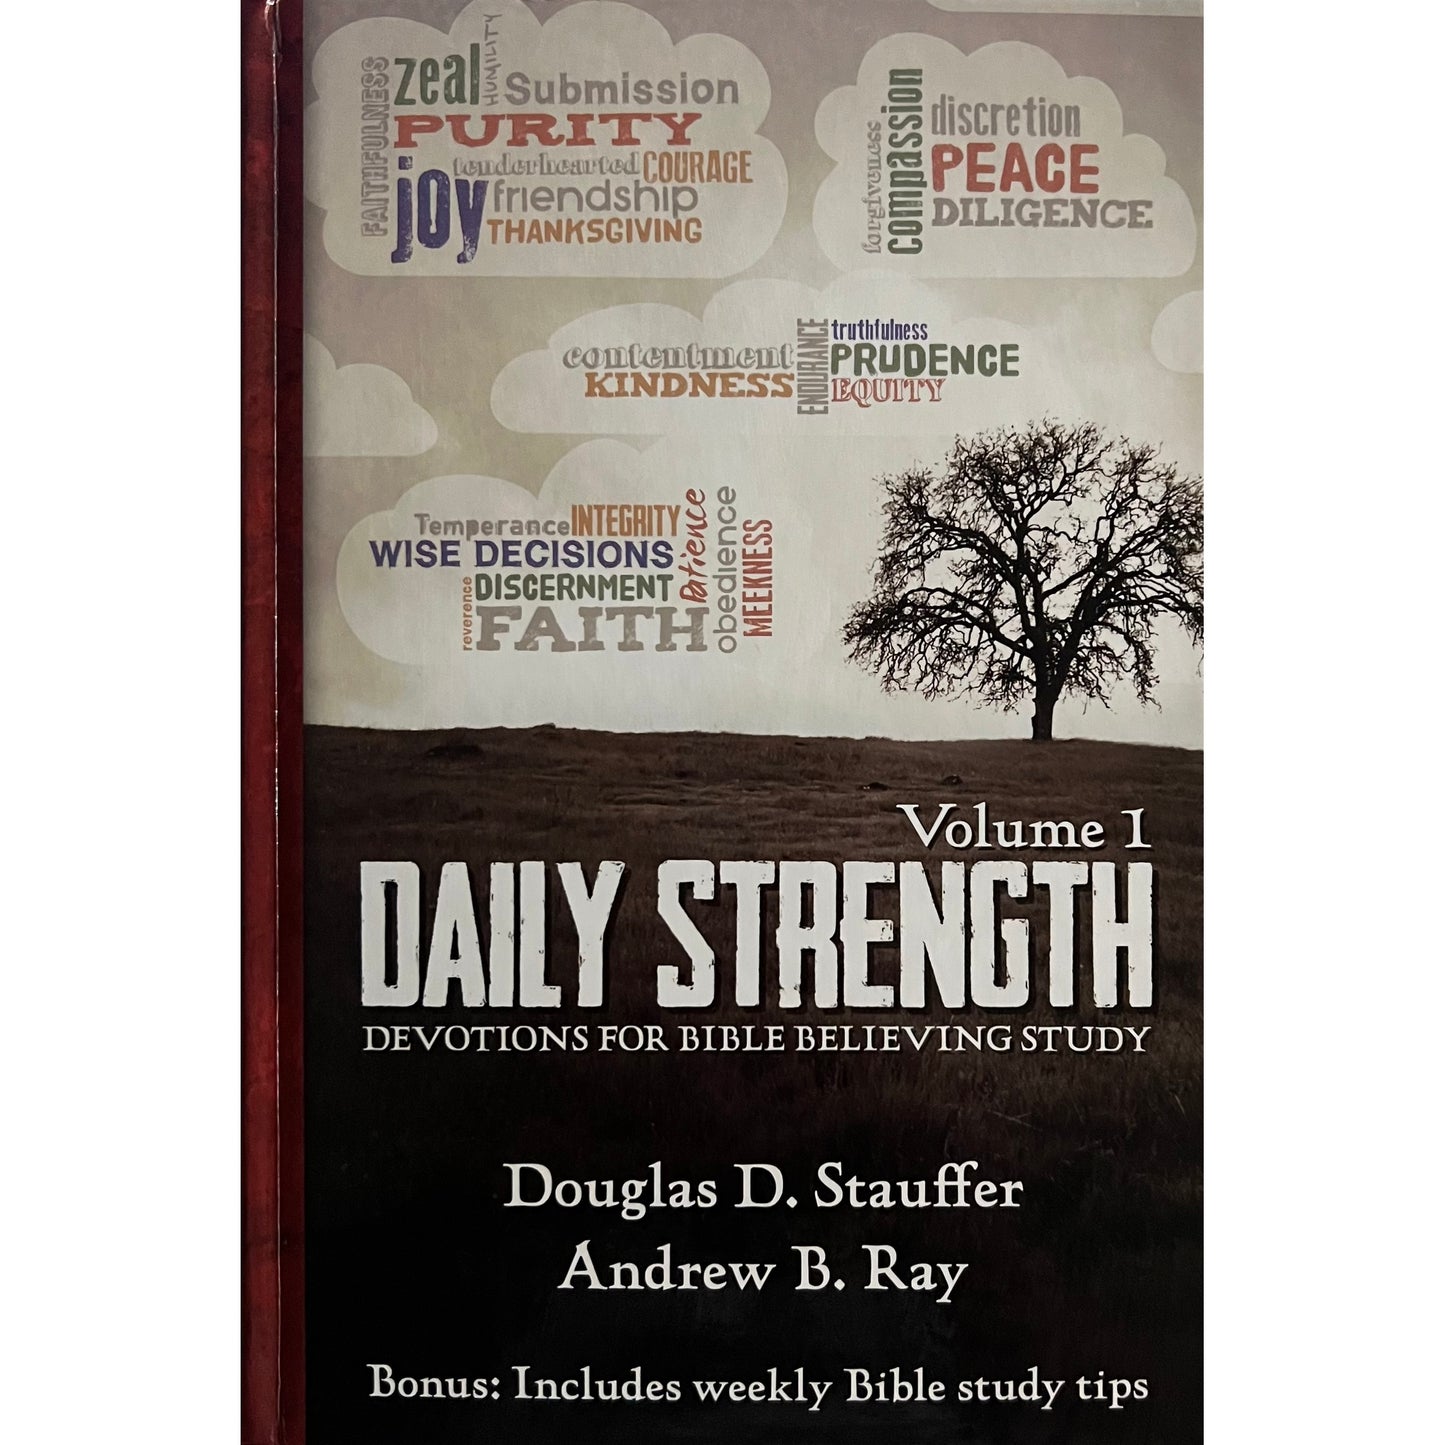 Daily Strength I: Devotions for Bible-Believing Study